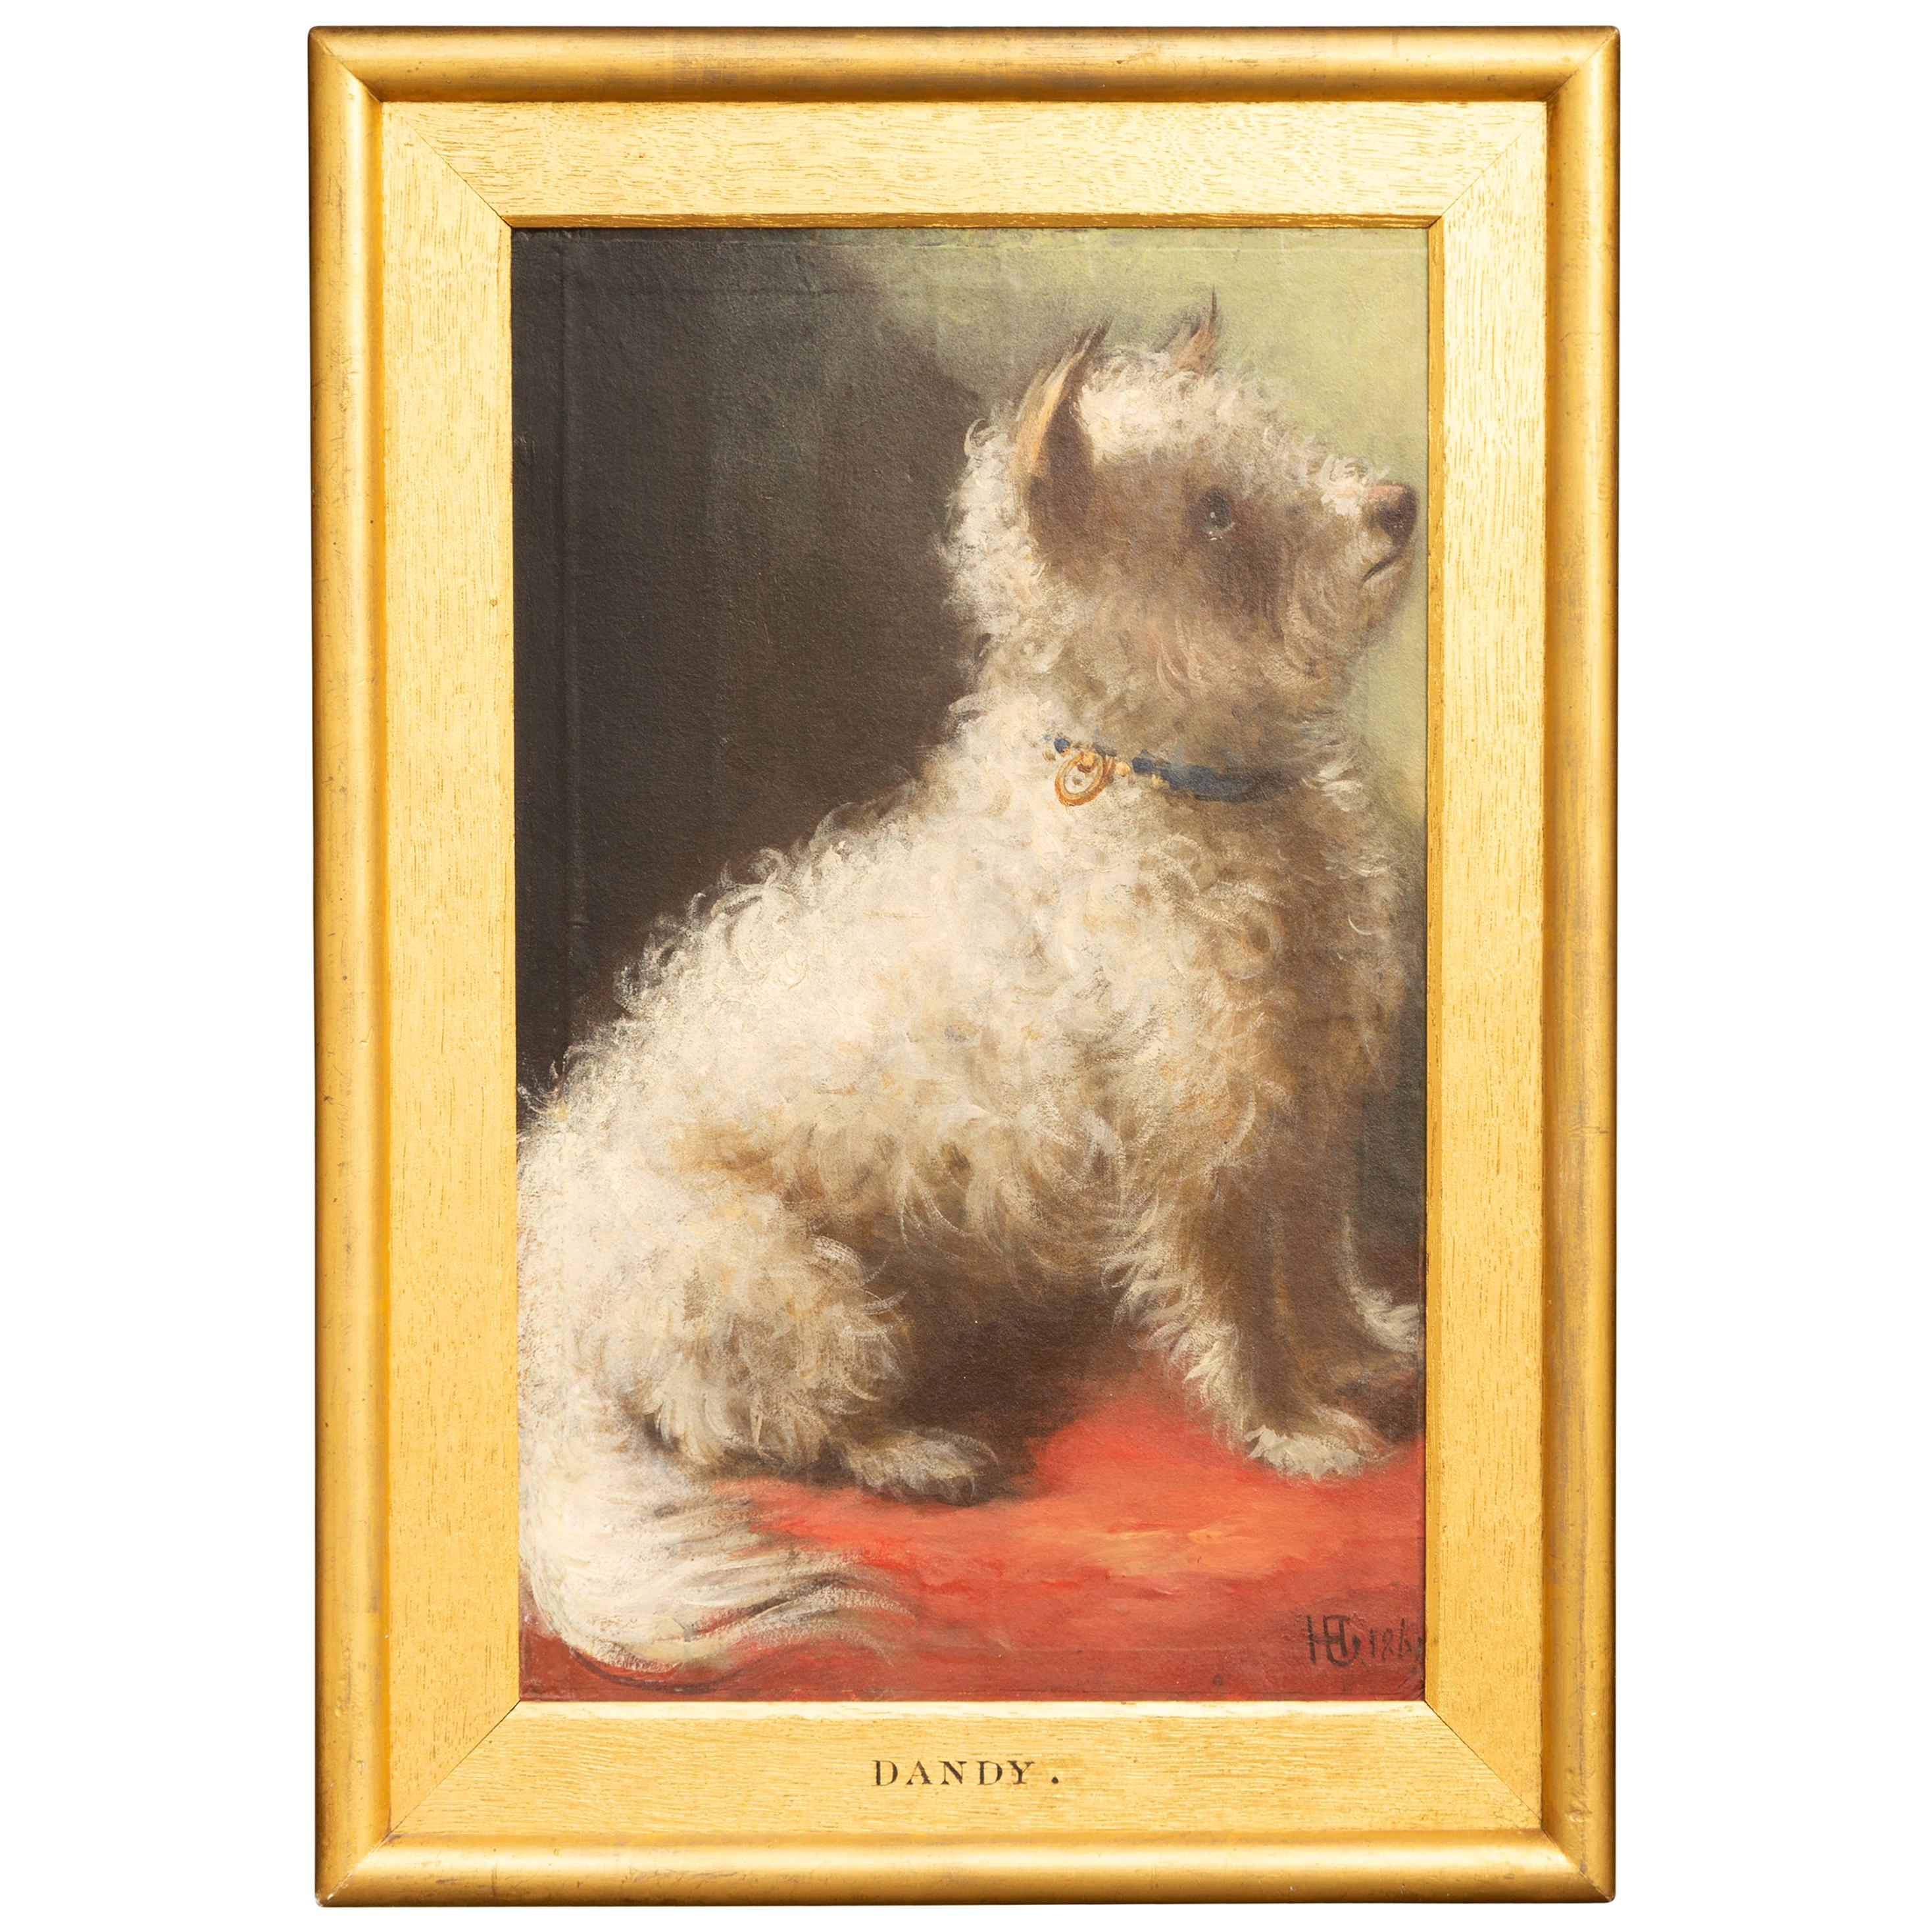 English 1861 Oil on Board Dog Painting Depicting Dandy Sitting on a Red Fabric